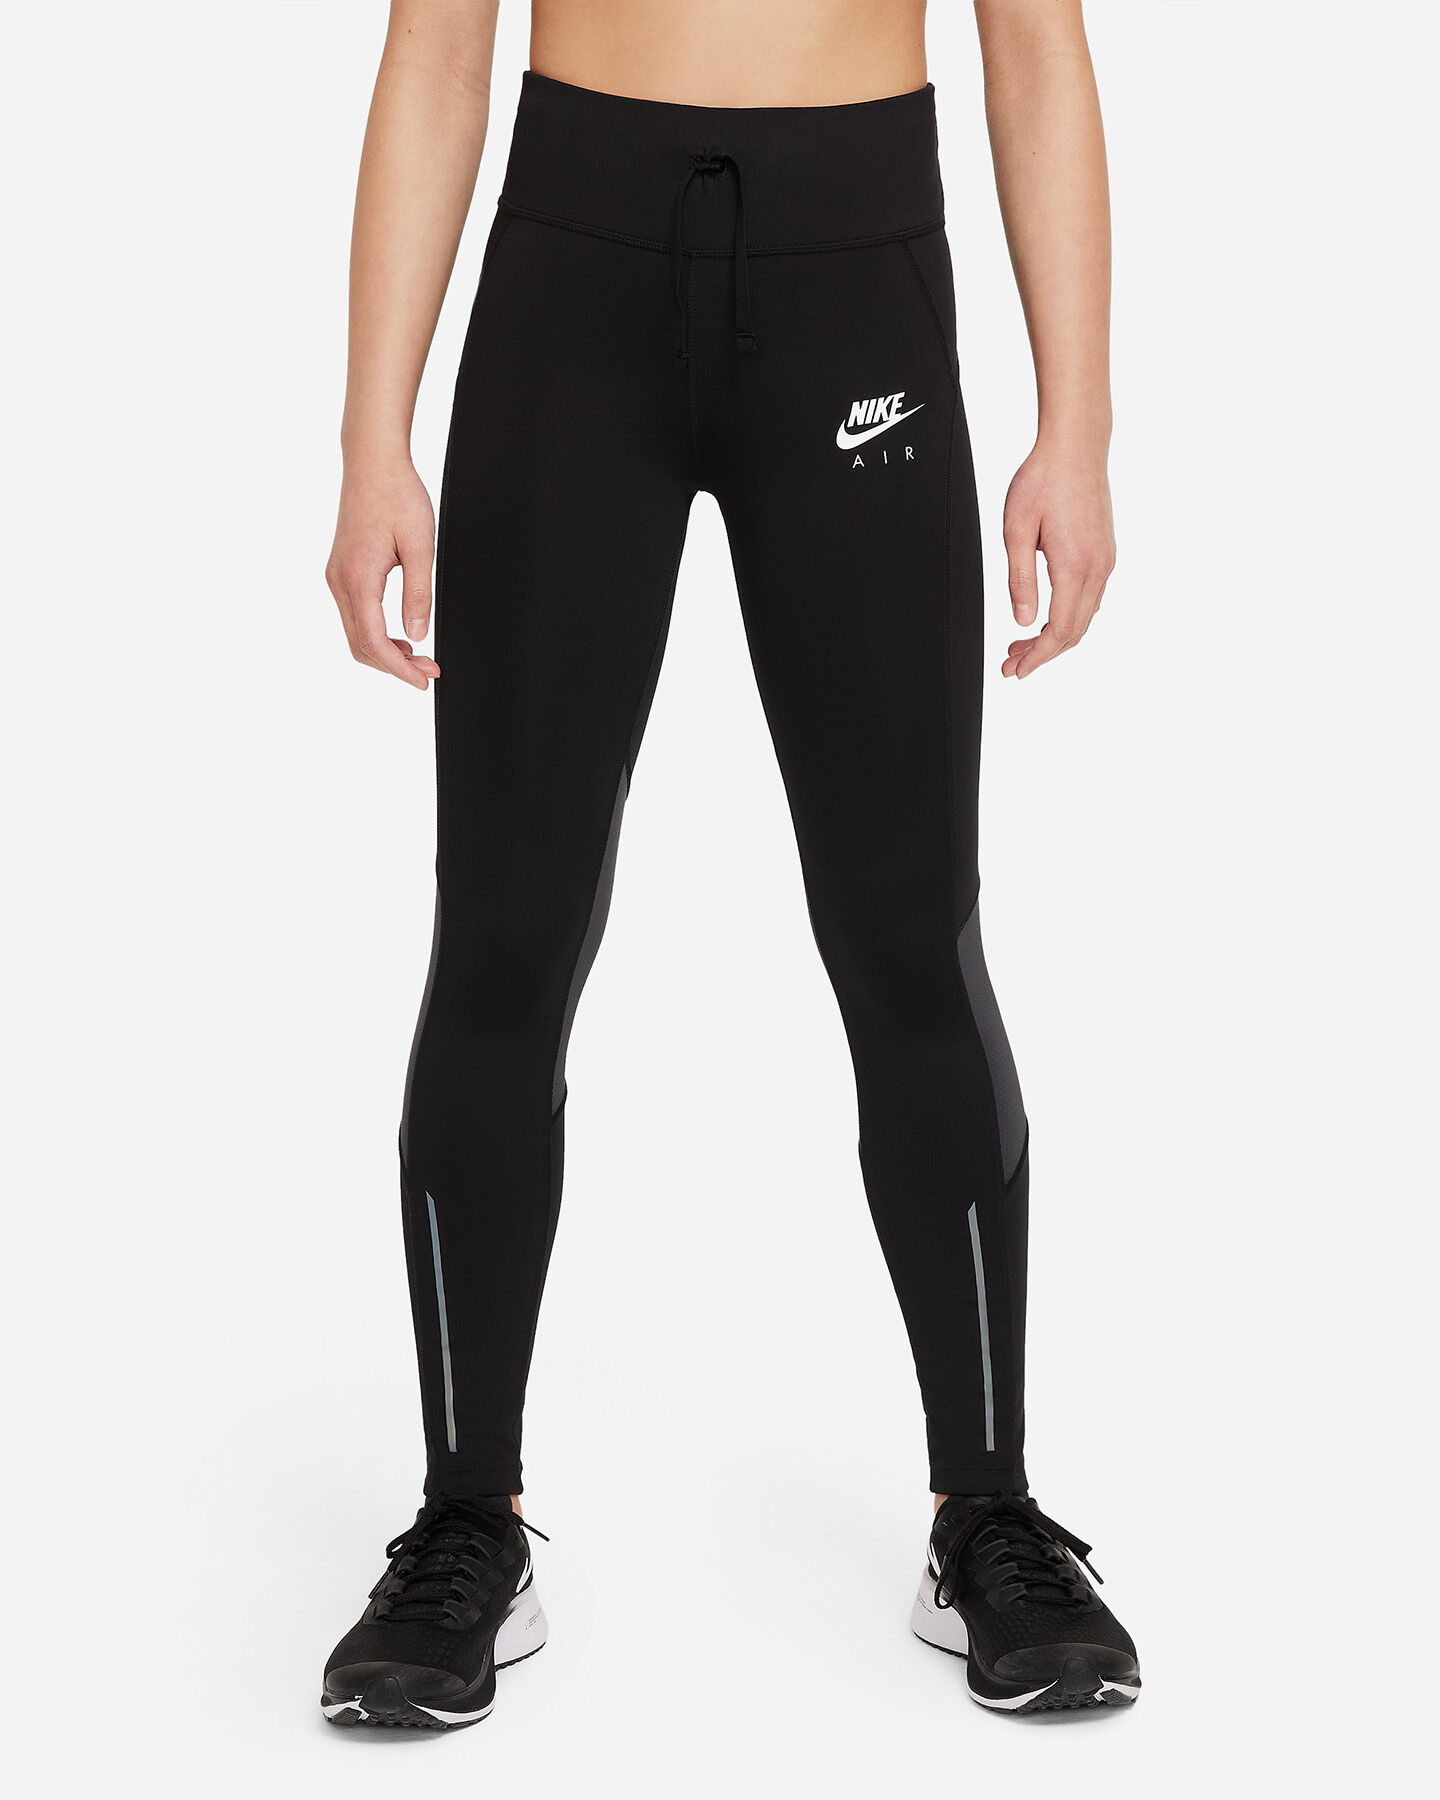  Leggings NIKE POLY AIR JR S5320230|010|S scatto 0